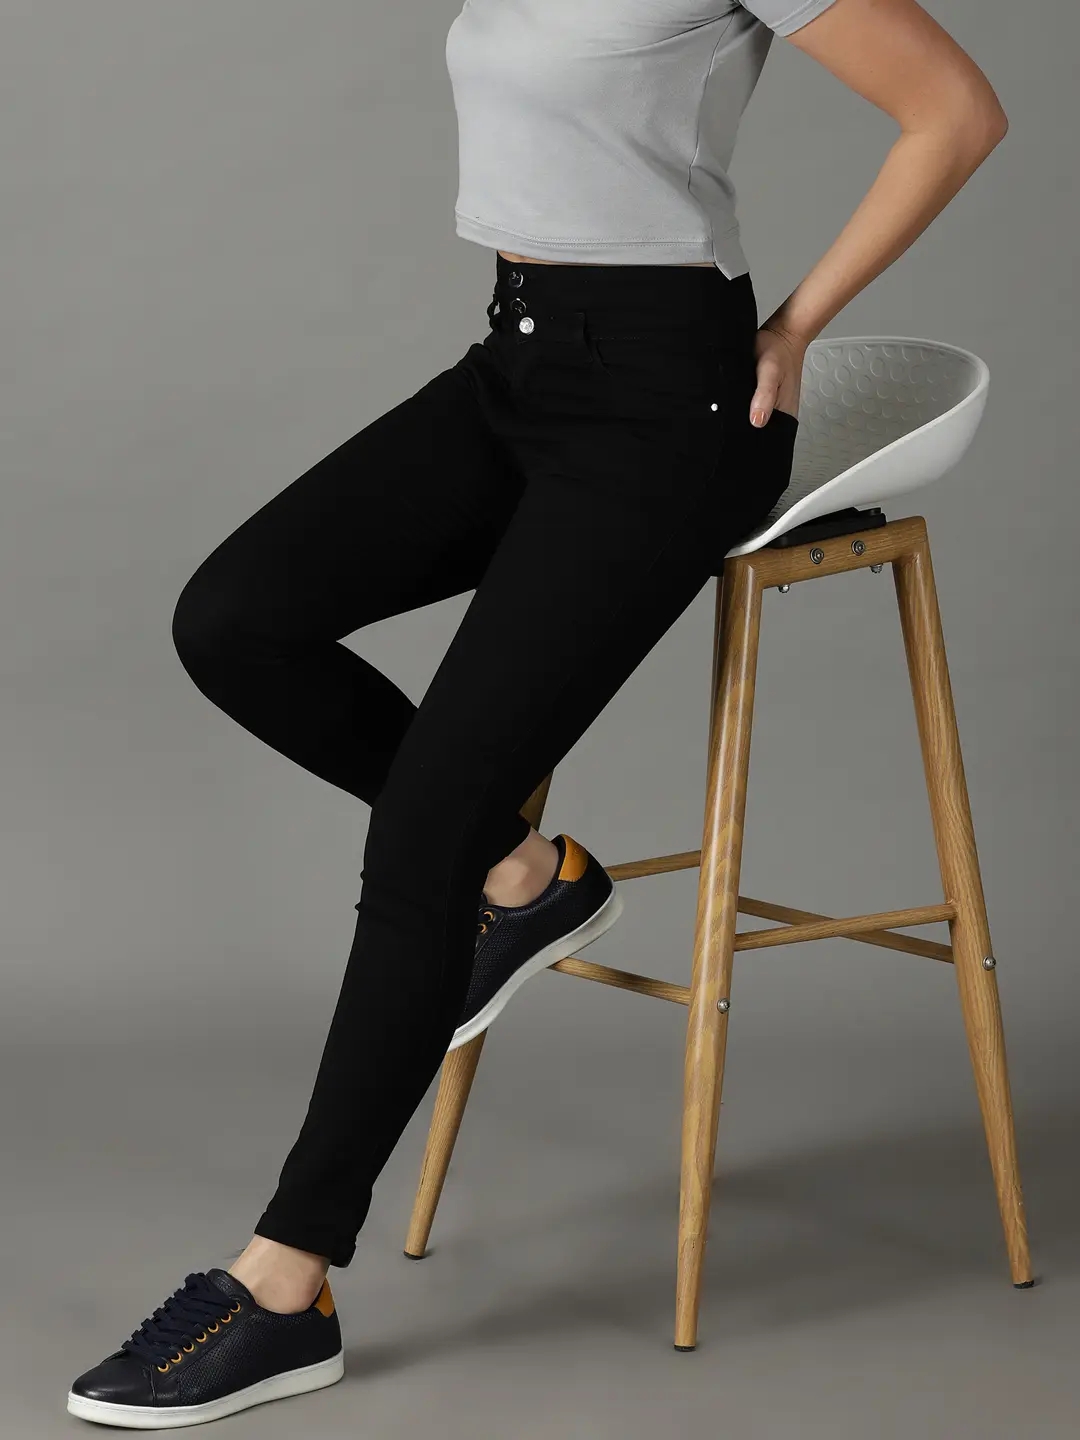 Showoff | SHOWOFF Women's Stretchable Clean Look Black Slim Fit Jeans